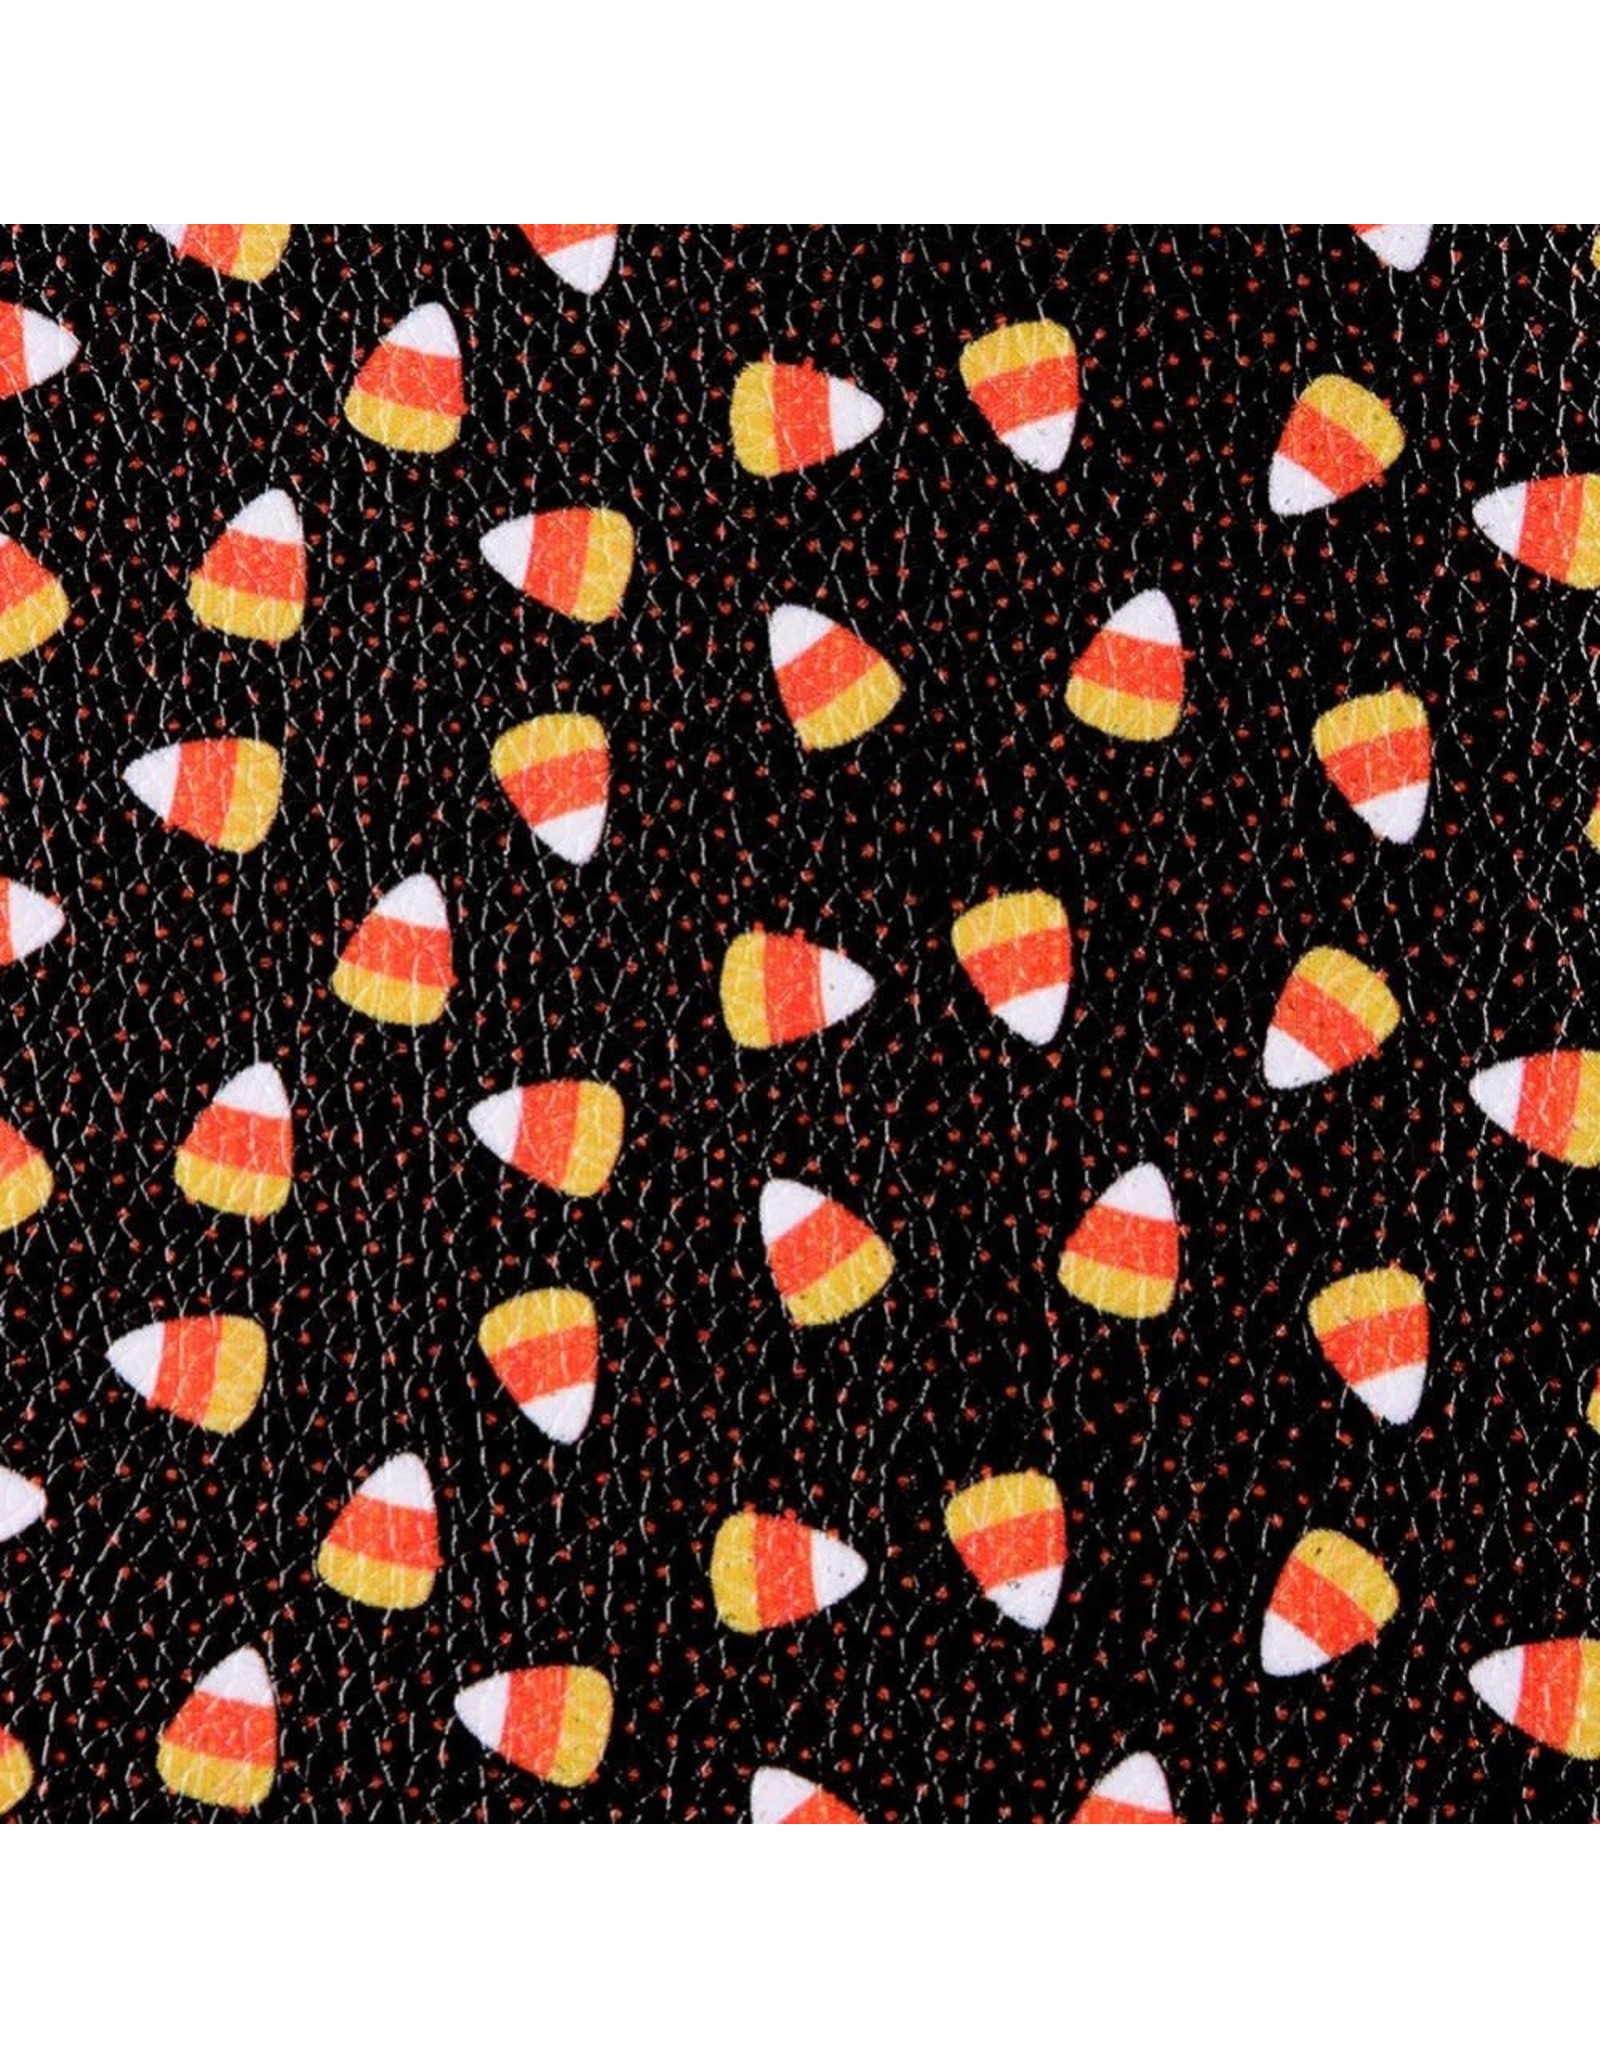 Faux Leather Beading Backing Black with Candy Corn  .5mm thick 8x12"